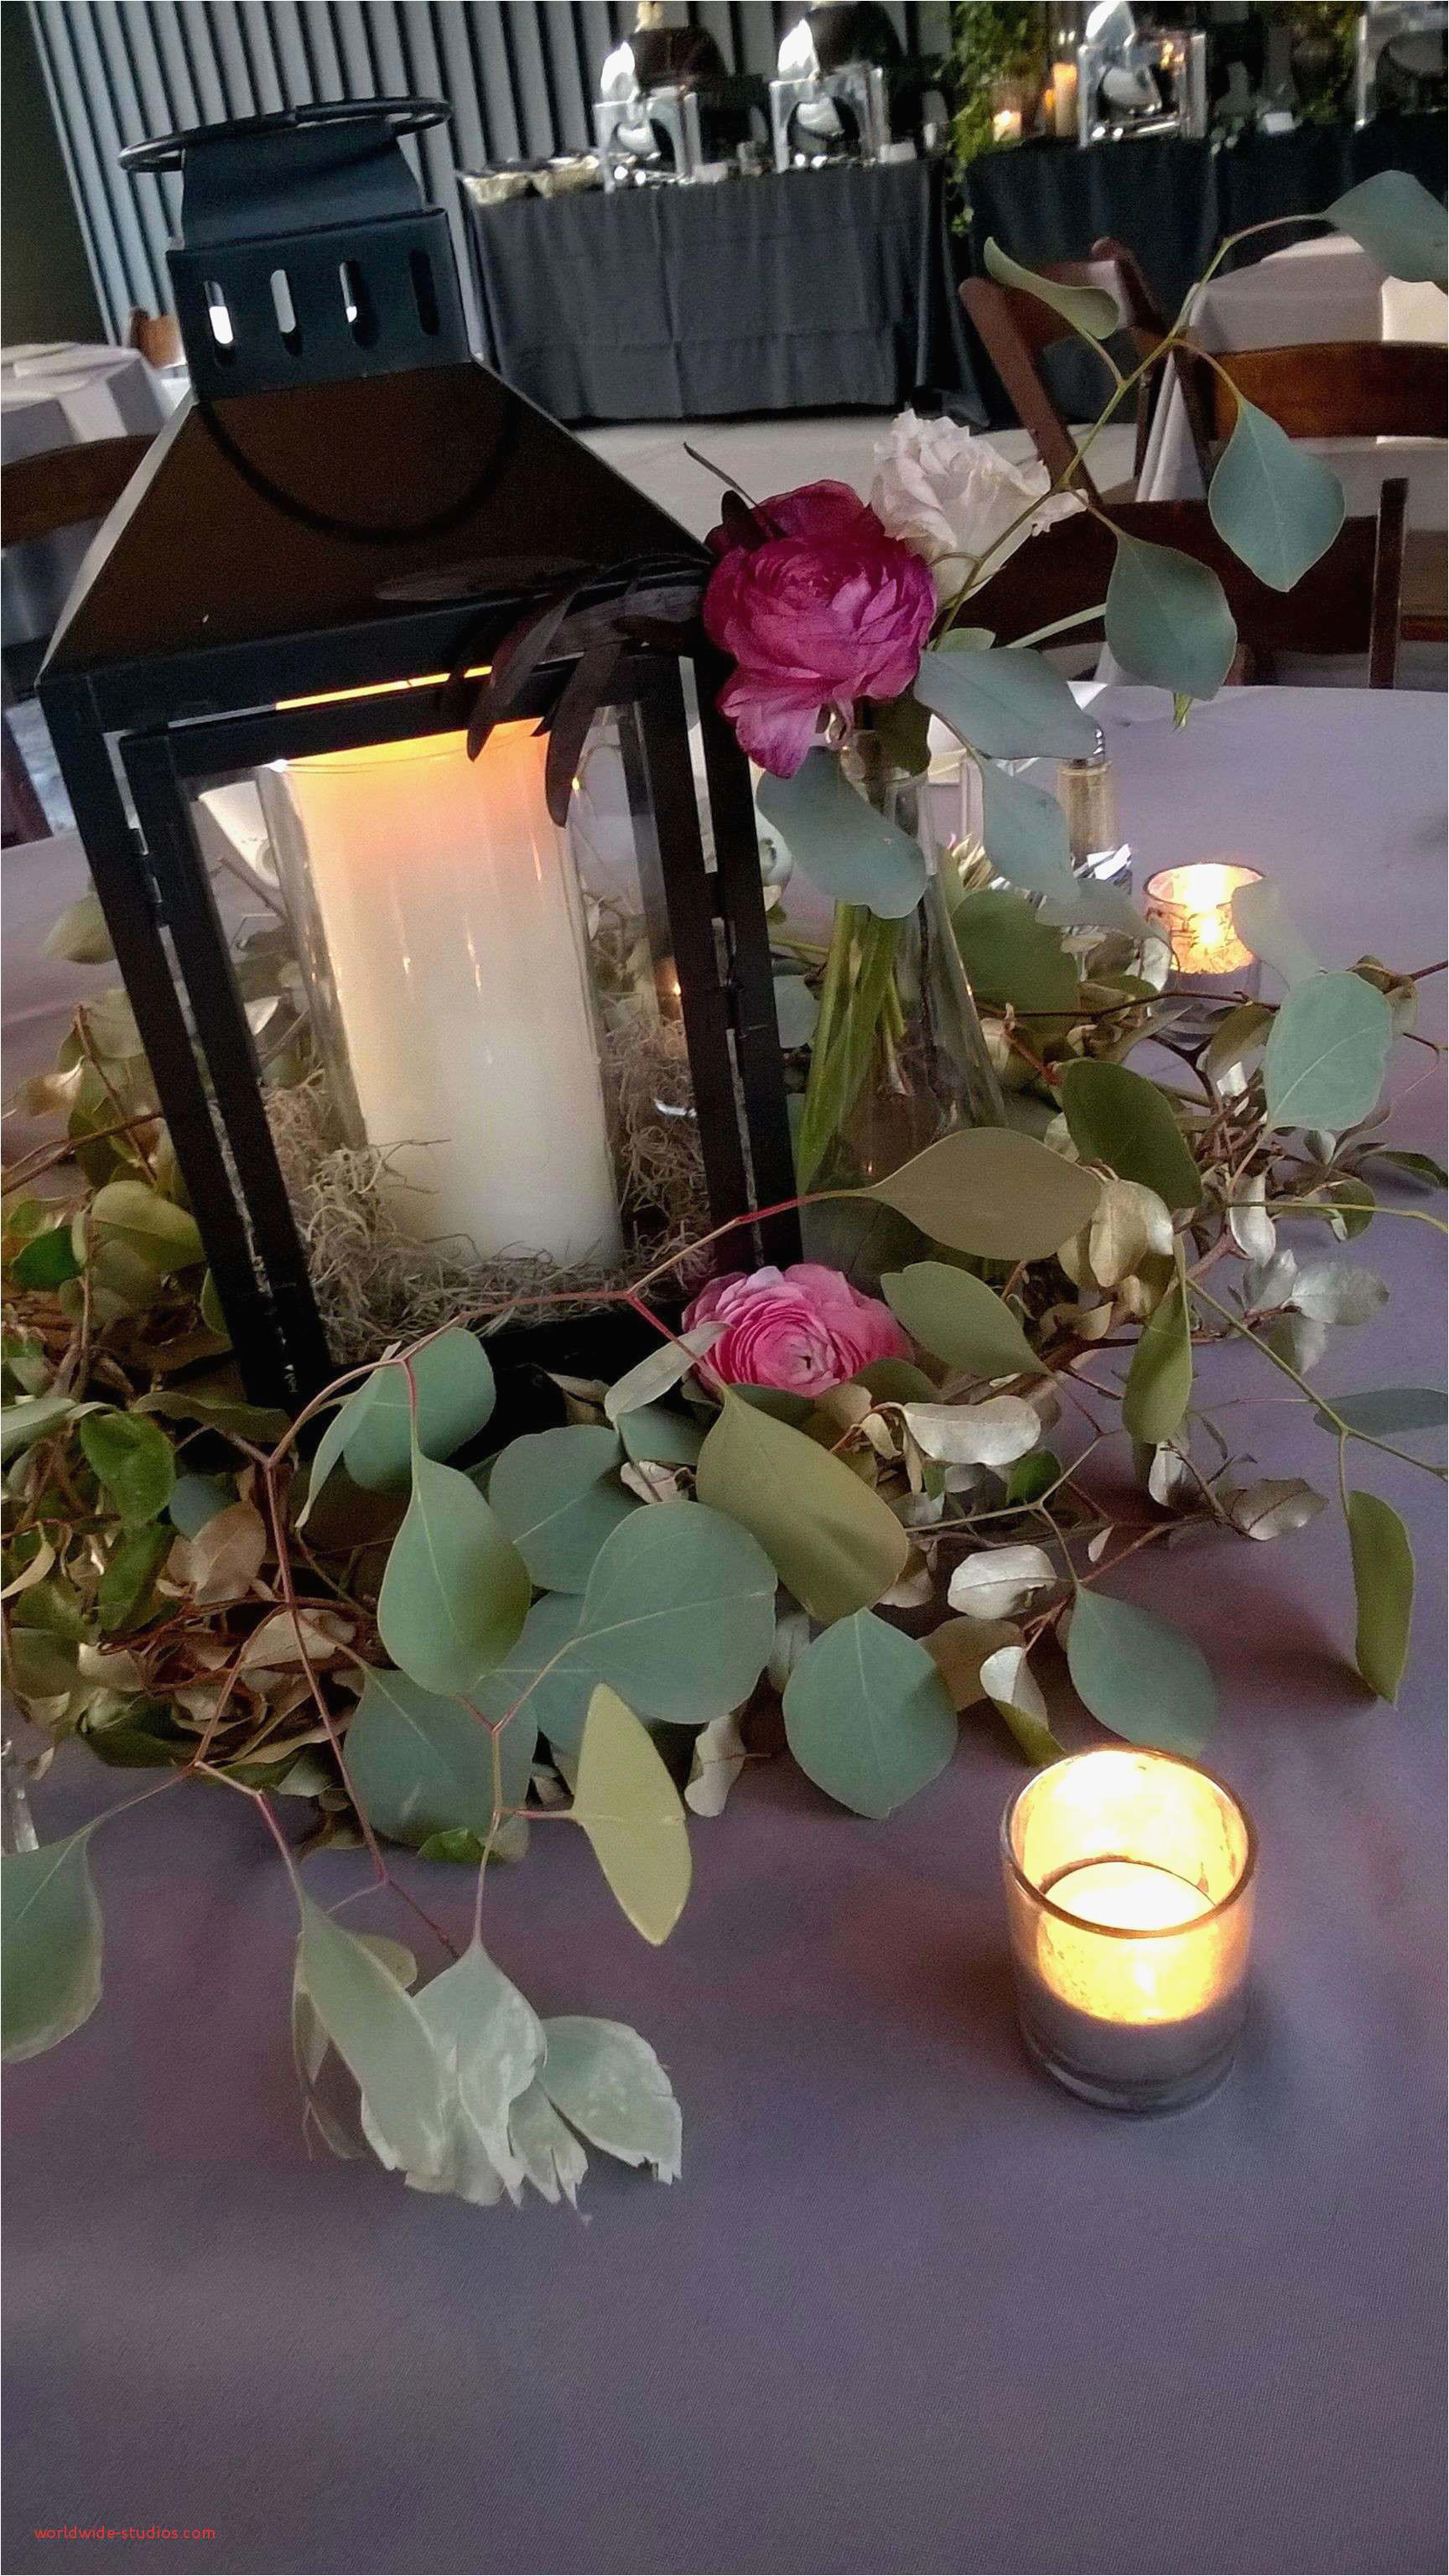 23 Perfect Small Hurricane Vase 2024 free download small hurricane vase of backyard wedding reception ideas photo vases hurricane for weddings with backyard wedding reception ideas simple top result 97 fresh diy wedding ideas for a tight bud